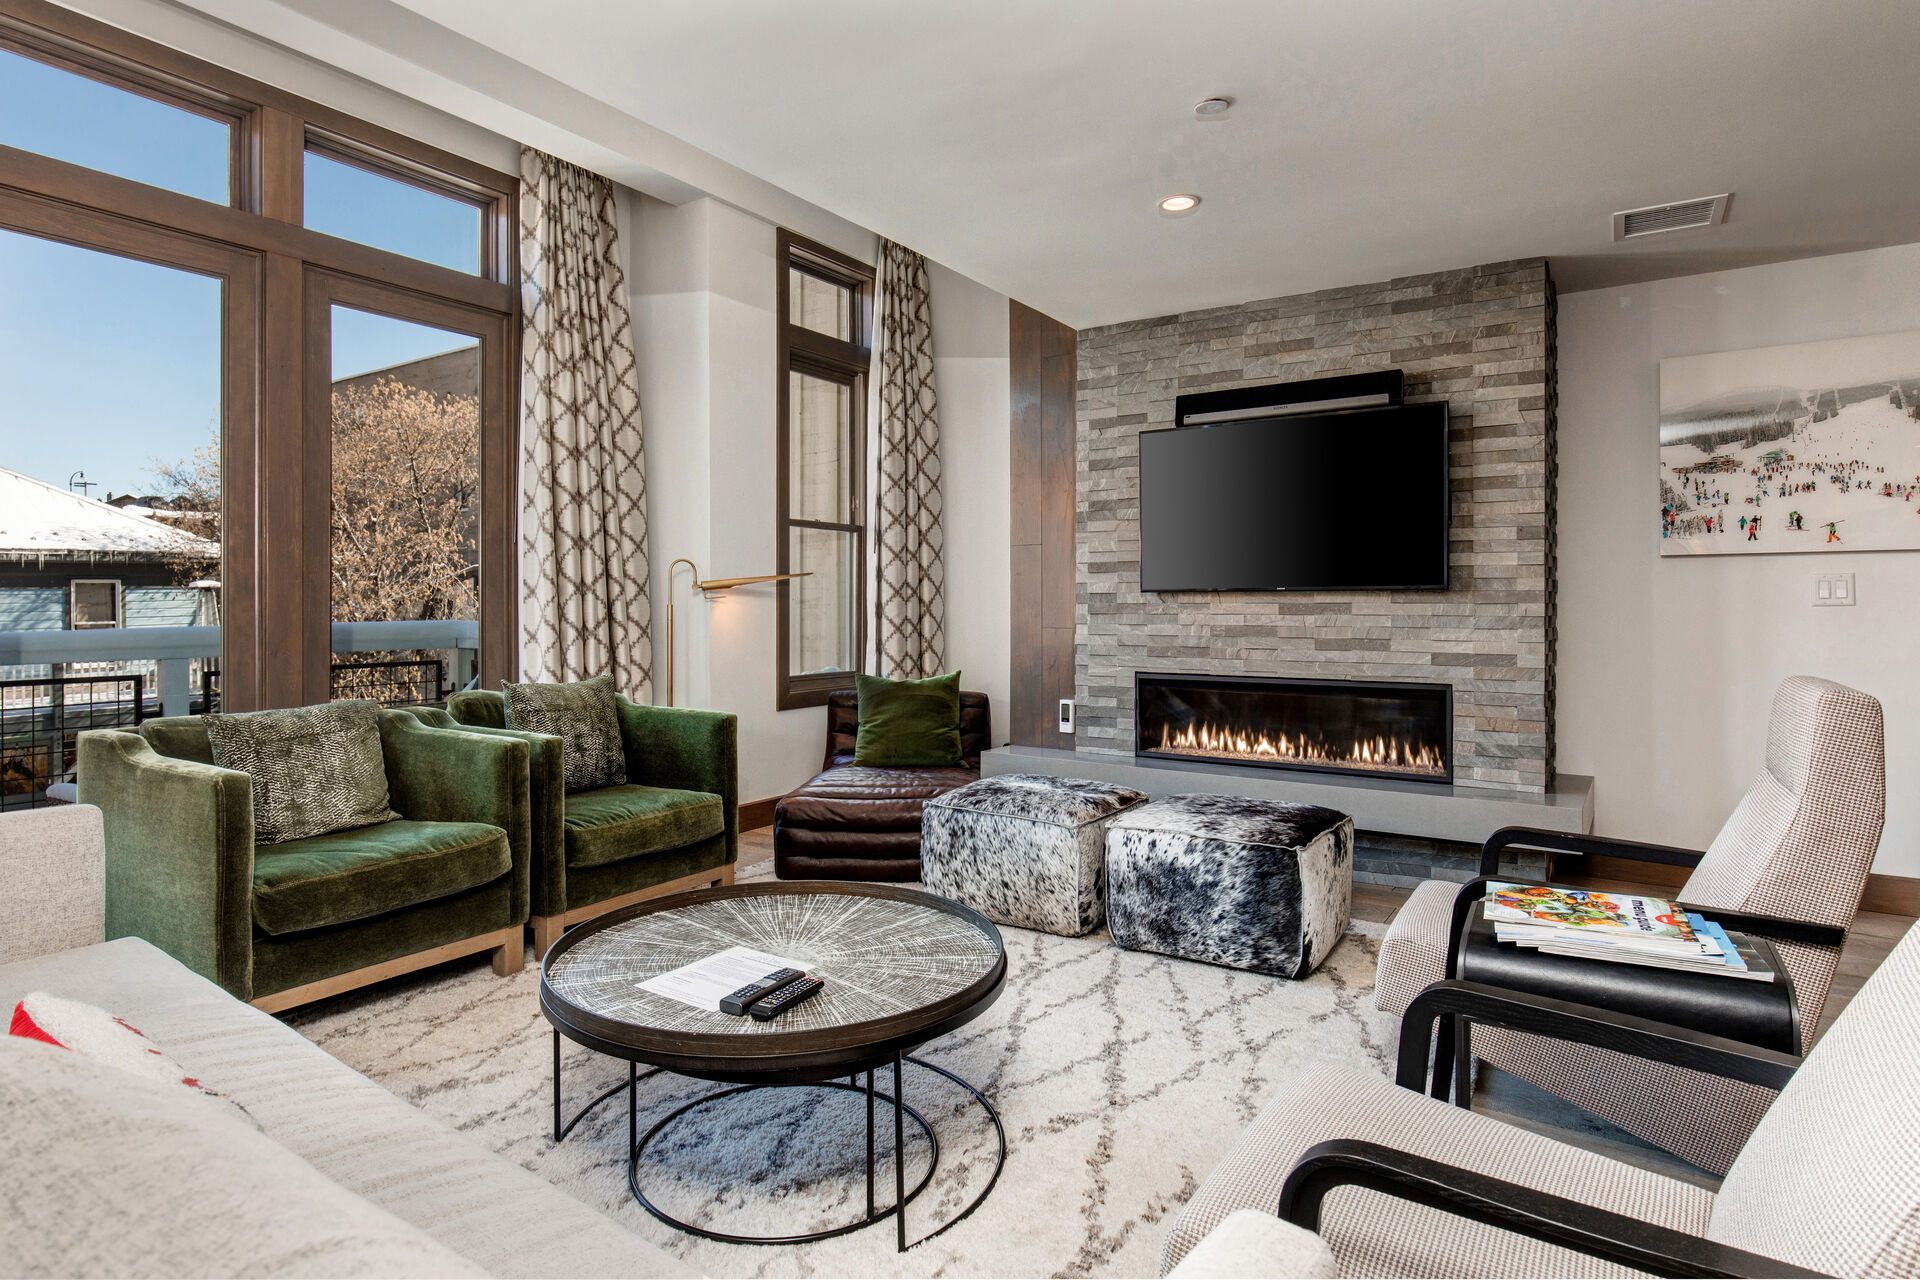 Living Room with Fireplace and Smart TV in Our Luxury Deer Valley Hotels.